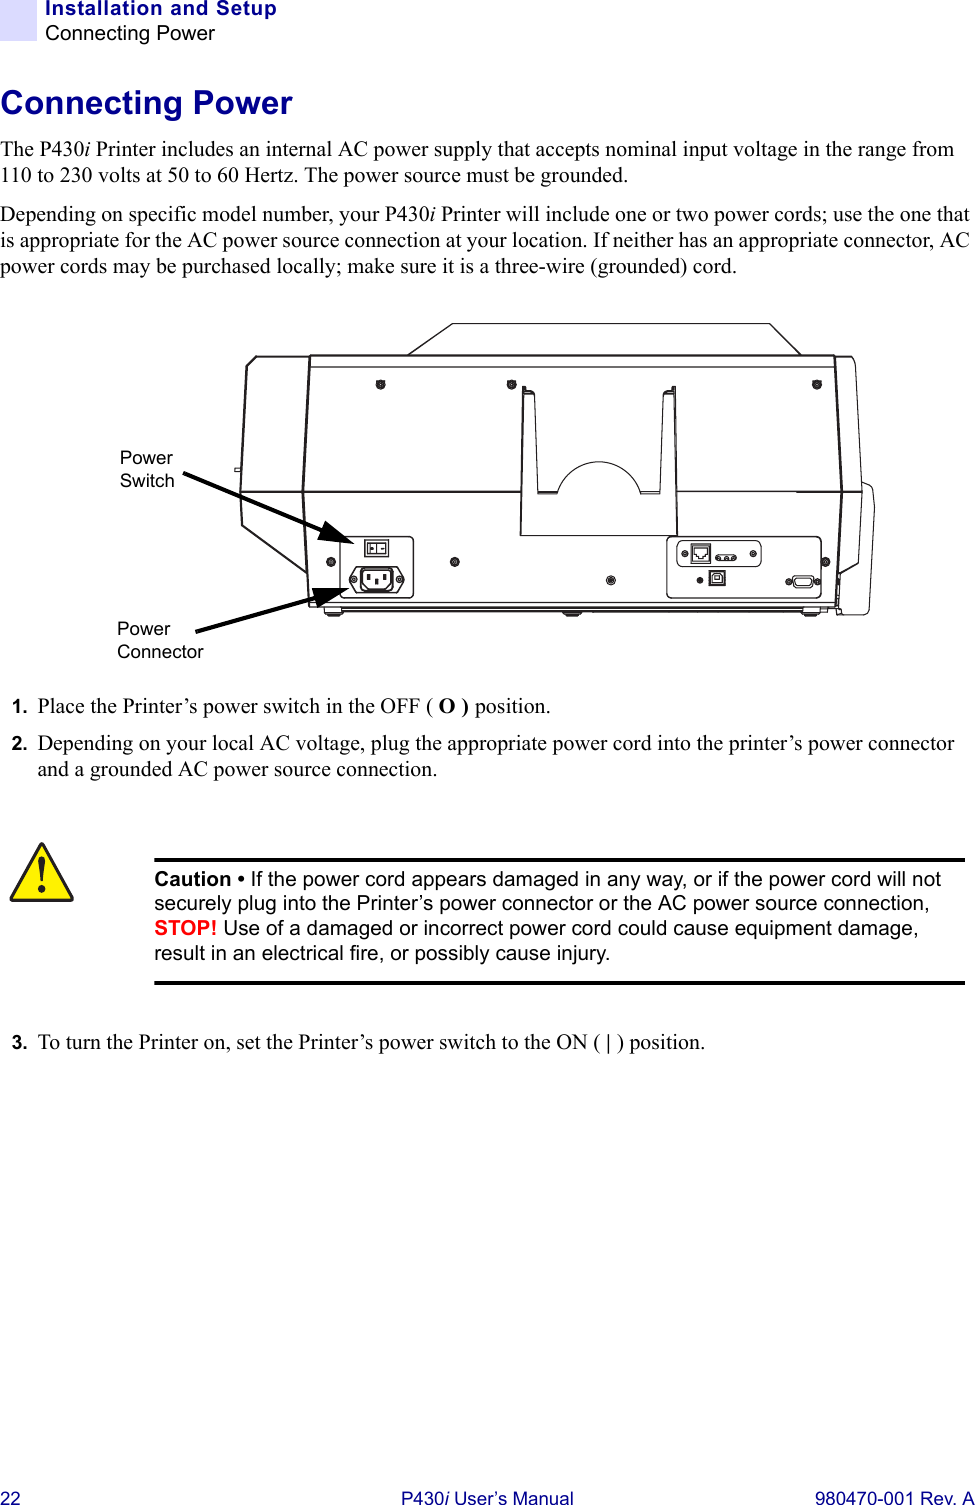 22 P430i User’s Manual 980470-001 Rev. AInstallation and SetupConnecting PowerConnecting PowerThe P430i Printer includes an internal AC power supply that accepts nominal input voltage in the range from 110 to 230 volts at 50 to 60 Hertz. The power source must be grounded.Depending on specific model number, your P430i Printer will include one or two power cords; use the one that is appropriate for the AC power source connection at your location. If neither has an appropriate connector, AC power cords may be purchased locally; make sure it is a three-wire (grounded) cord.1. Place the Printer’s power switch in the OFF ( O ) position.2. Depending on your local AC voltage, plug the appropriate power cord into the printer’s power connector and a grounded AC power source connection.3. To turn the Printer on, set the Printer’s power switch to the ON ( | ) position.Caution • If the power cord appears damaged in any way, or if the power cord will not securely plug into the Printer’s power connector or the AC power source connection, STOP! Use of a damaged or incorrect power cord could cause equipment damage, result in an electrical fire, or possibly cause injury.Power ConnectorPower Switch